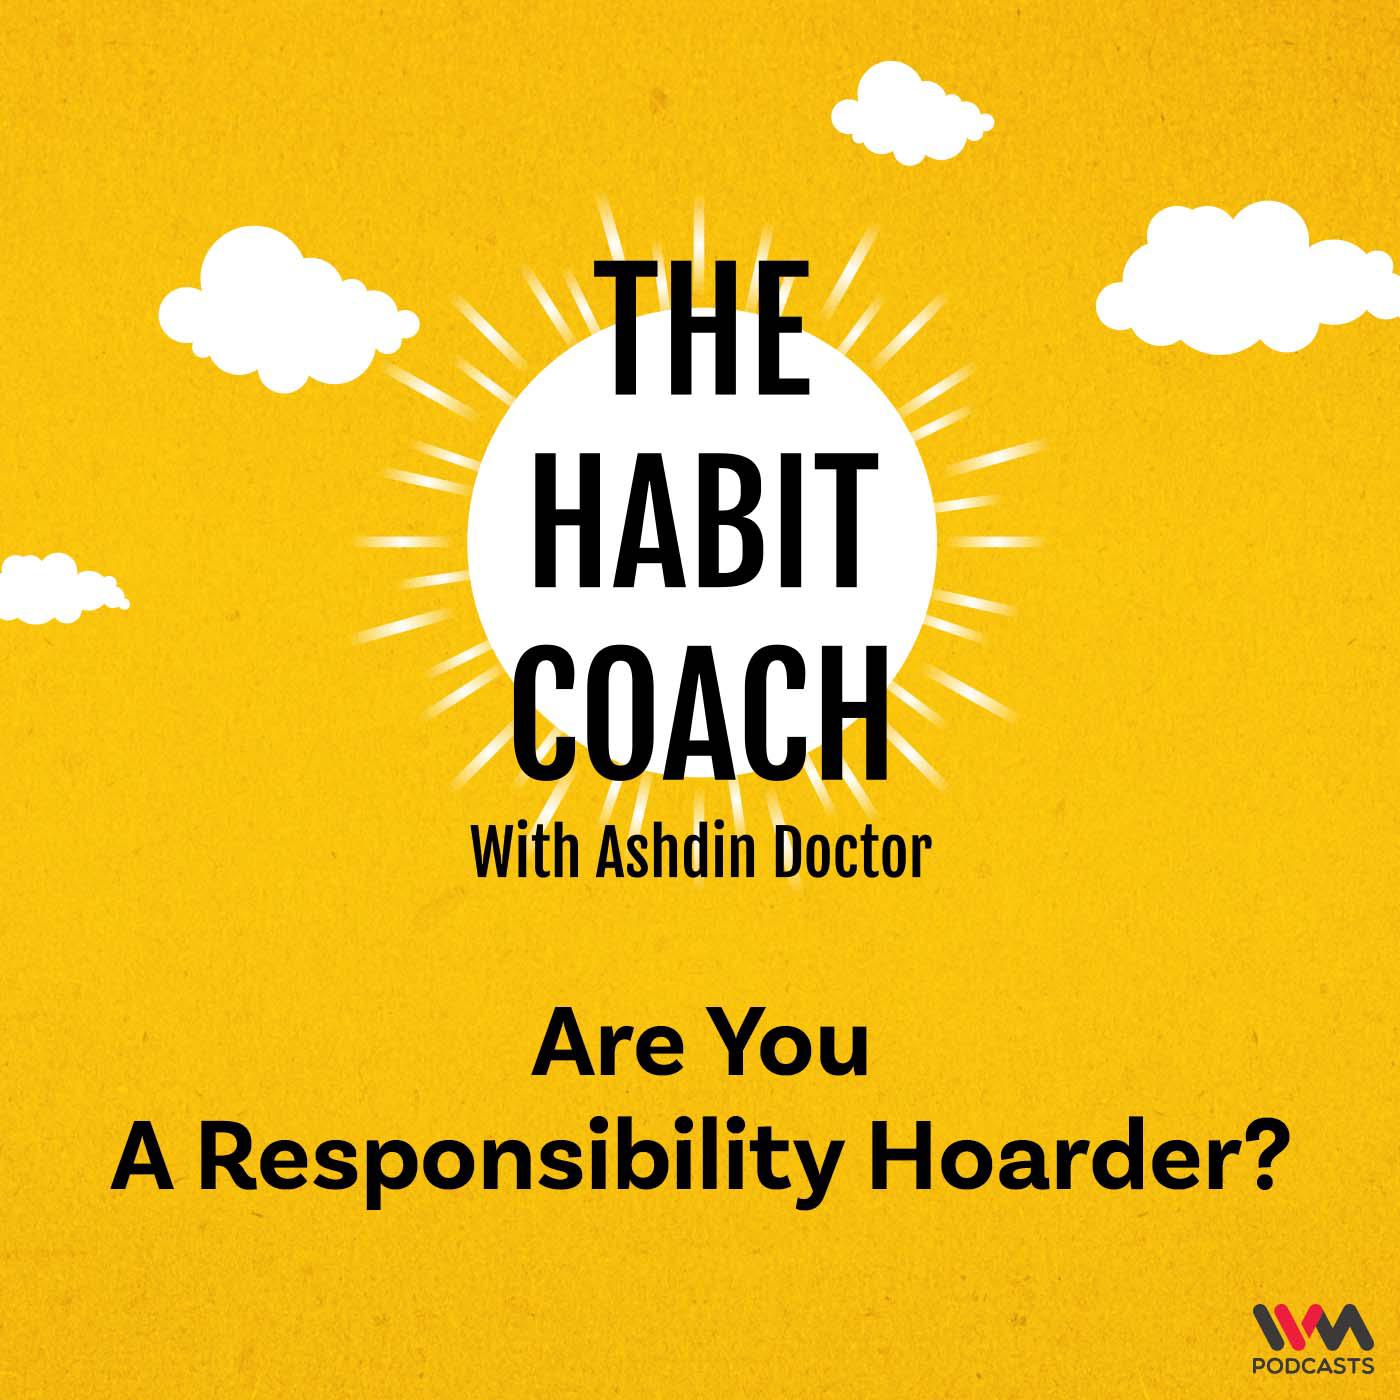 Are You A Responsibility Hoarder?